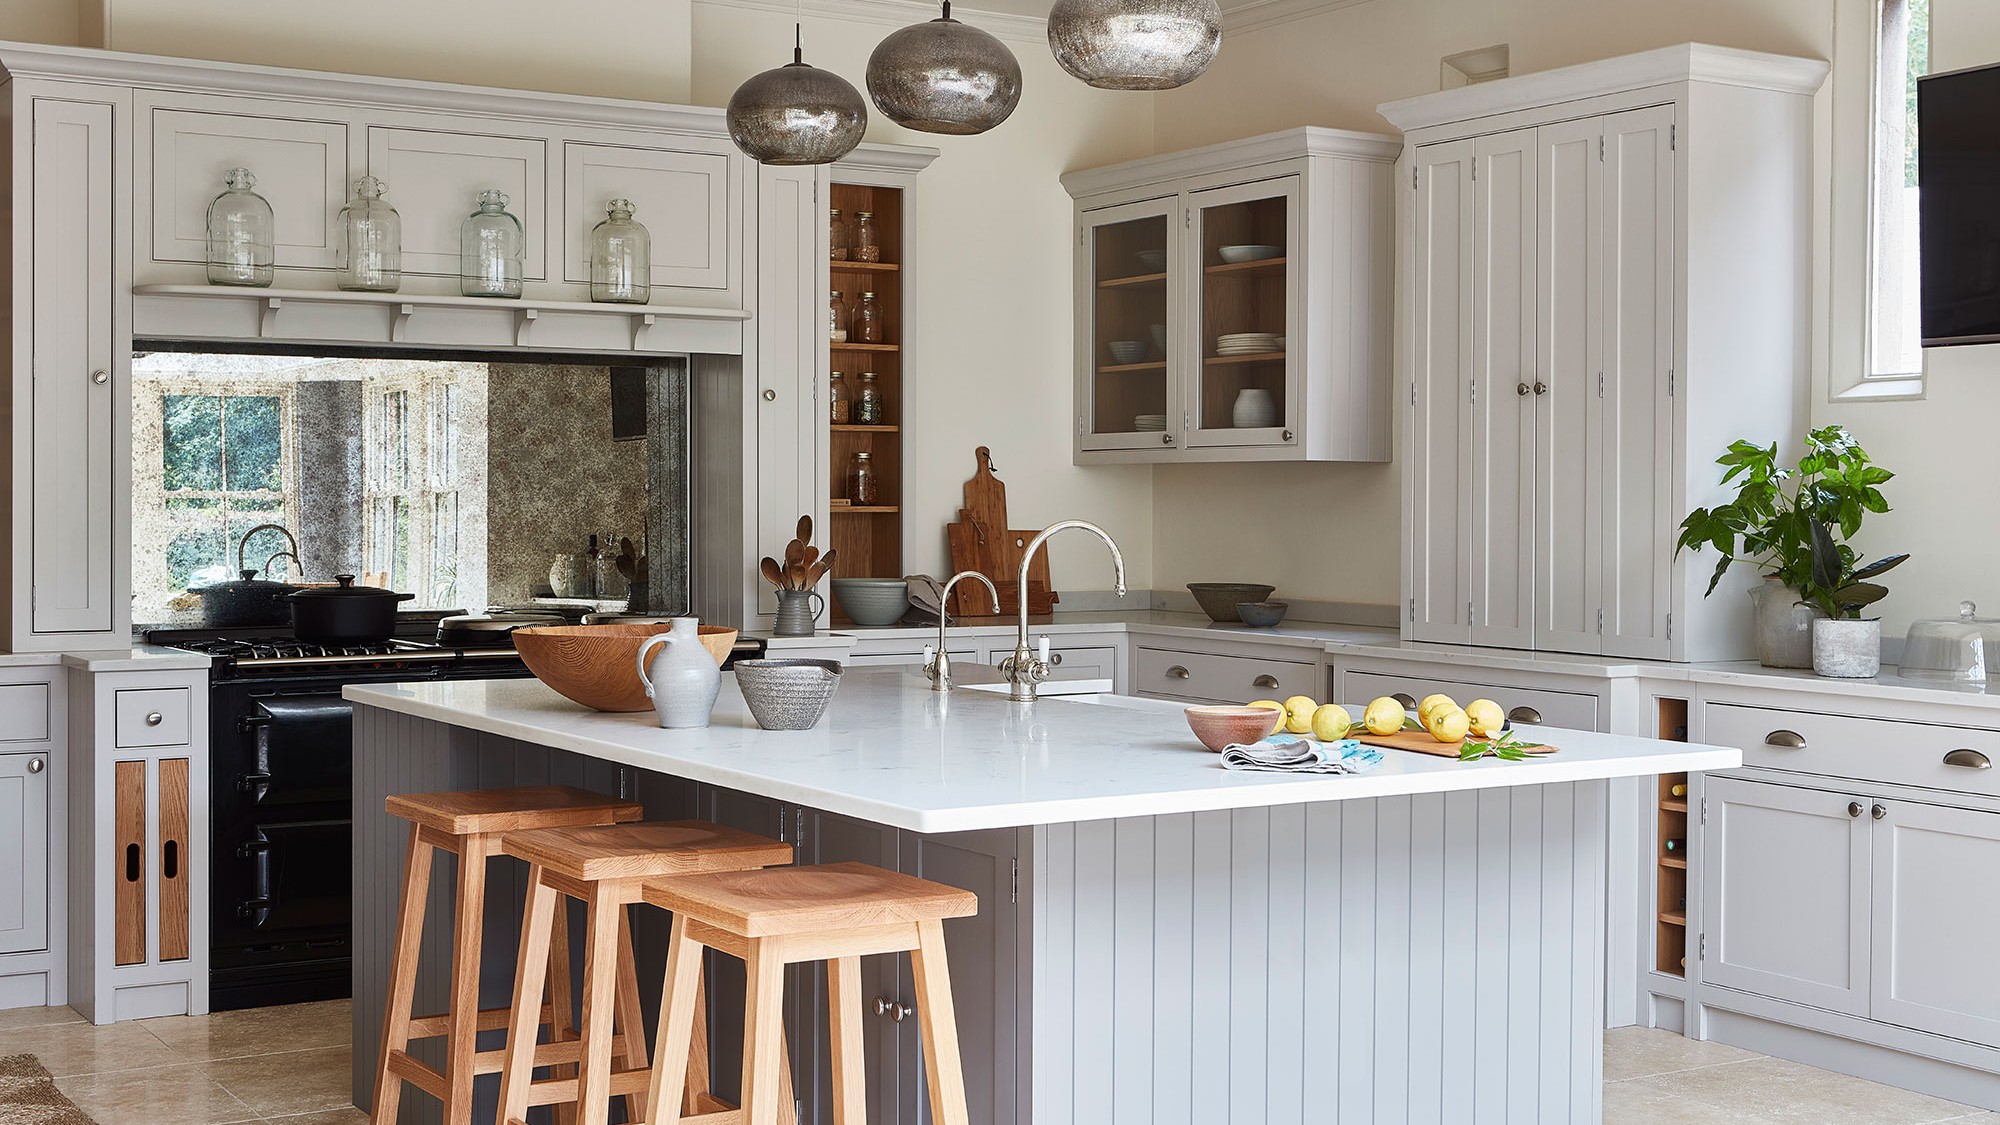 Fall in love with this grey Shaker kitchen in a Norfolk vicarage ...